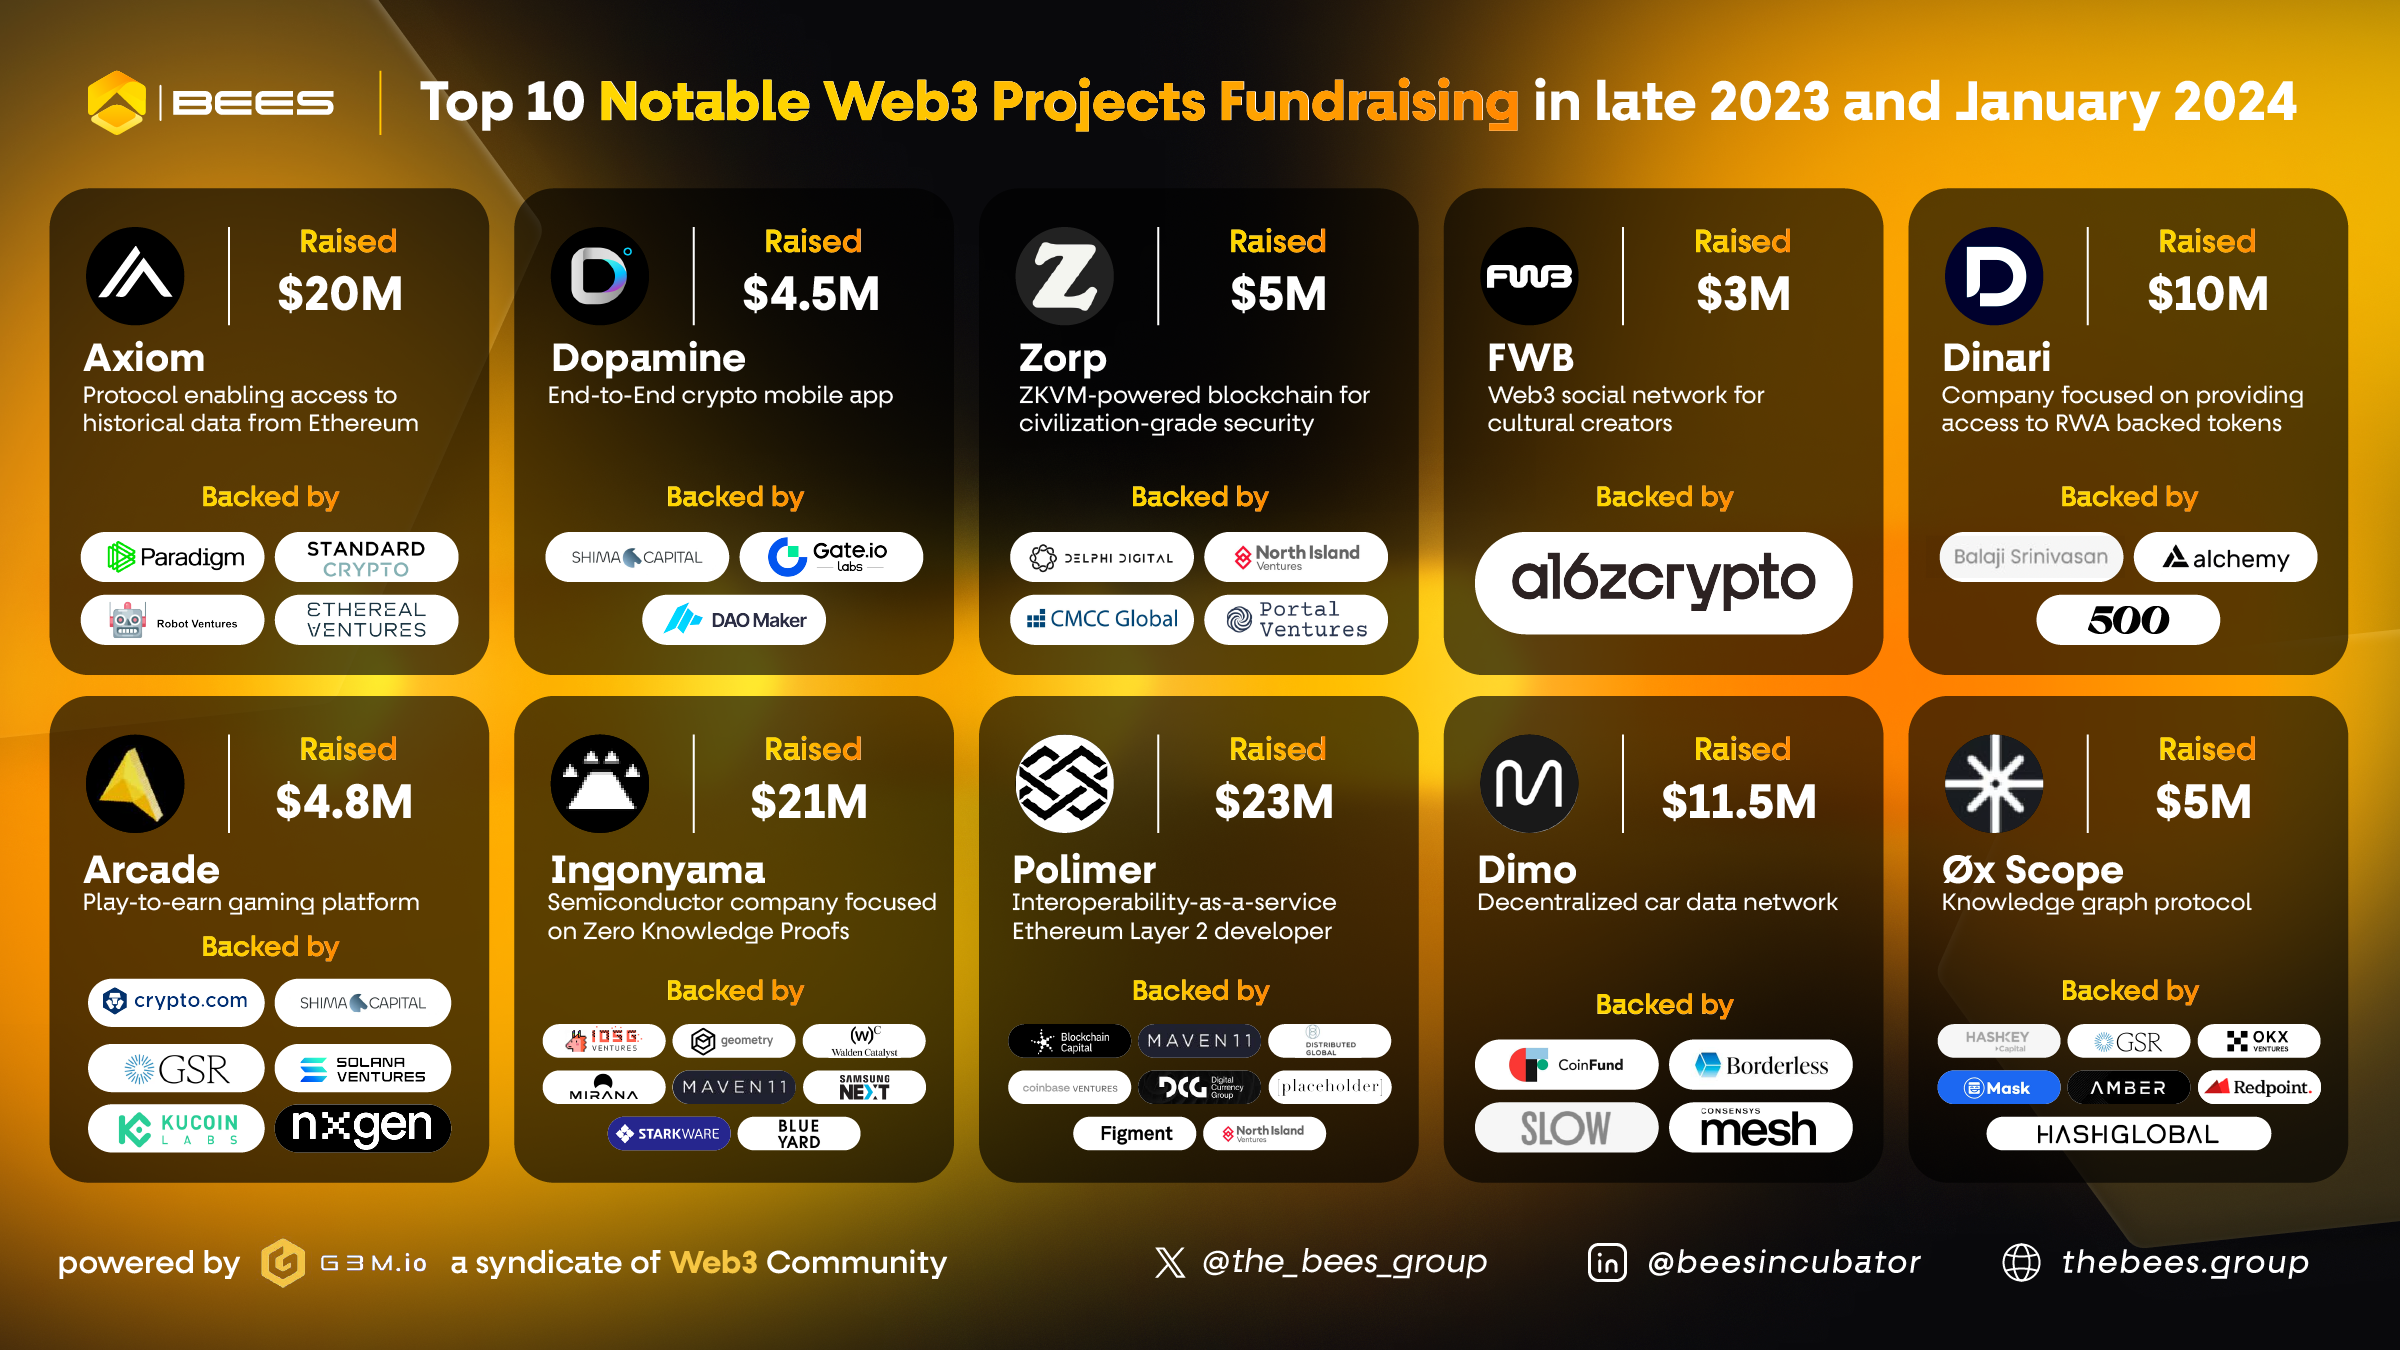 Top 10 Notable Fundraising Events in Web3 Late 2023 and January 2024